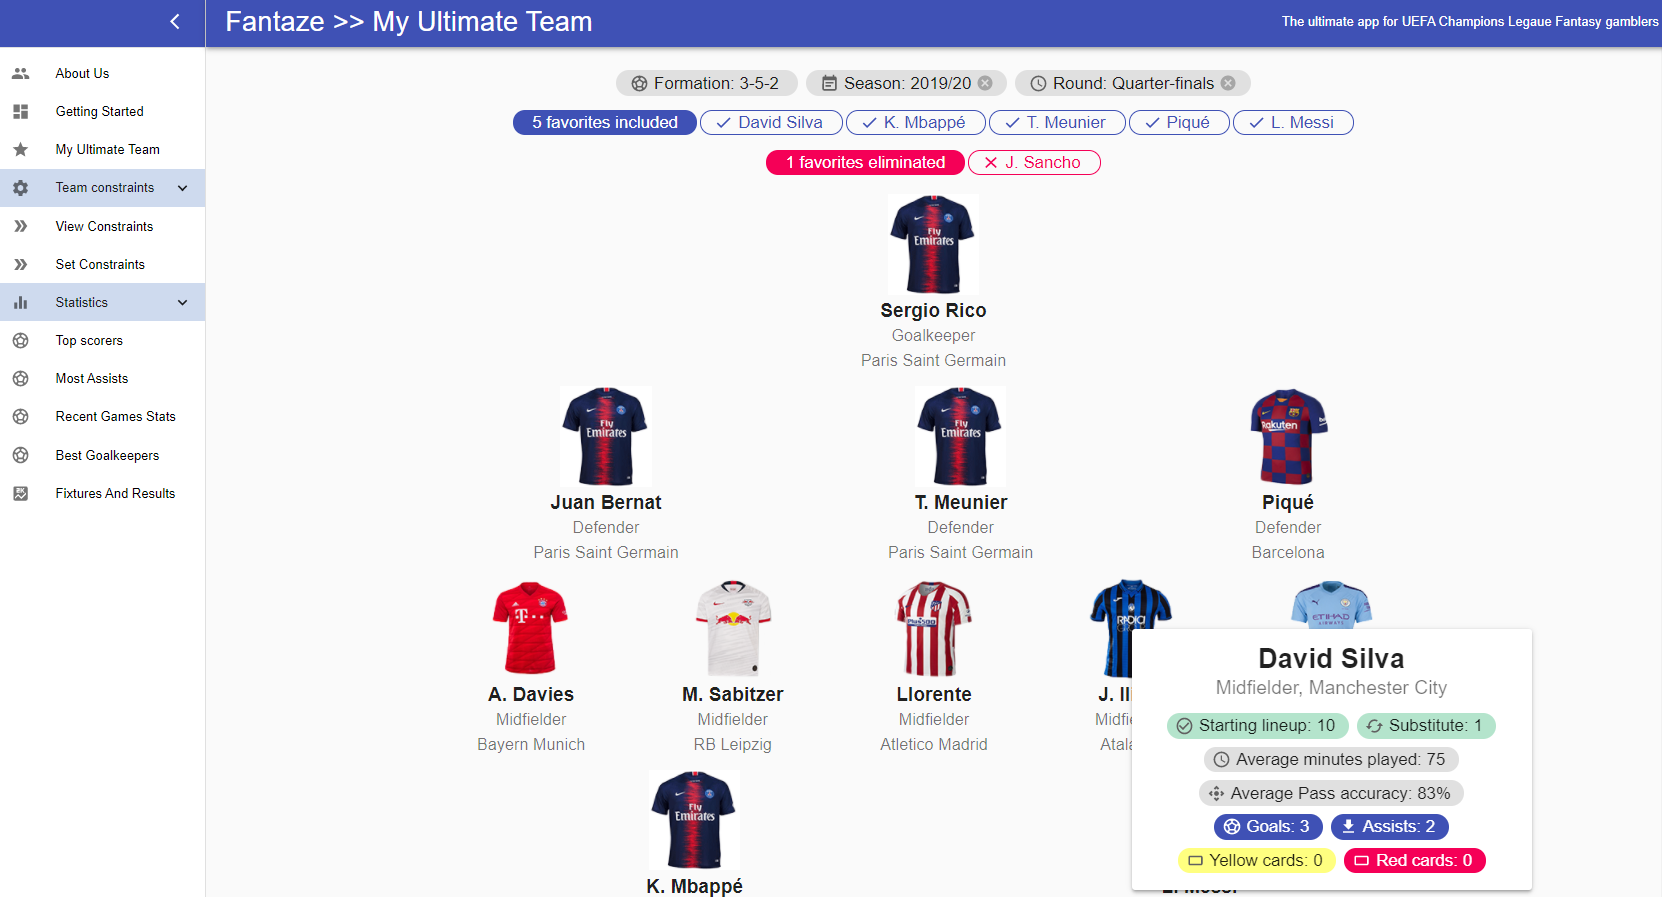 Revealing the ultimate team lineup chosen by our algorithm